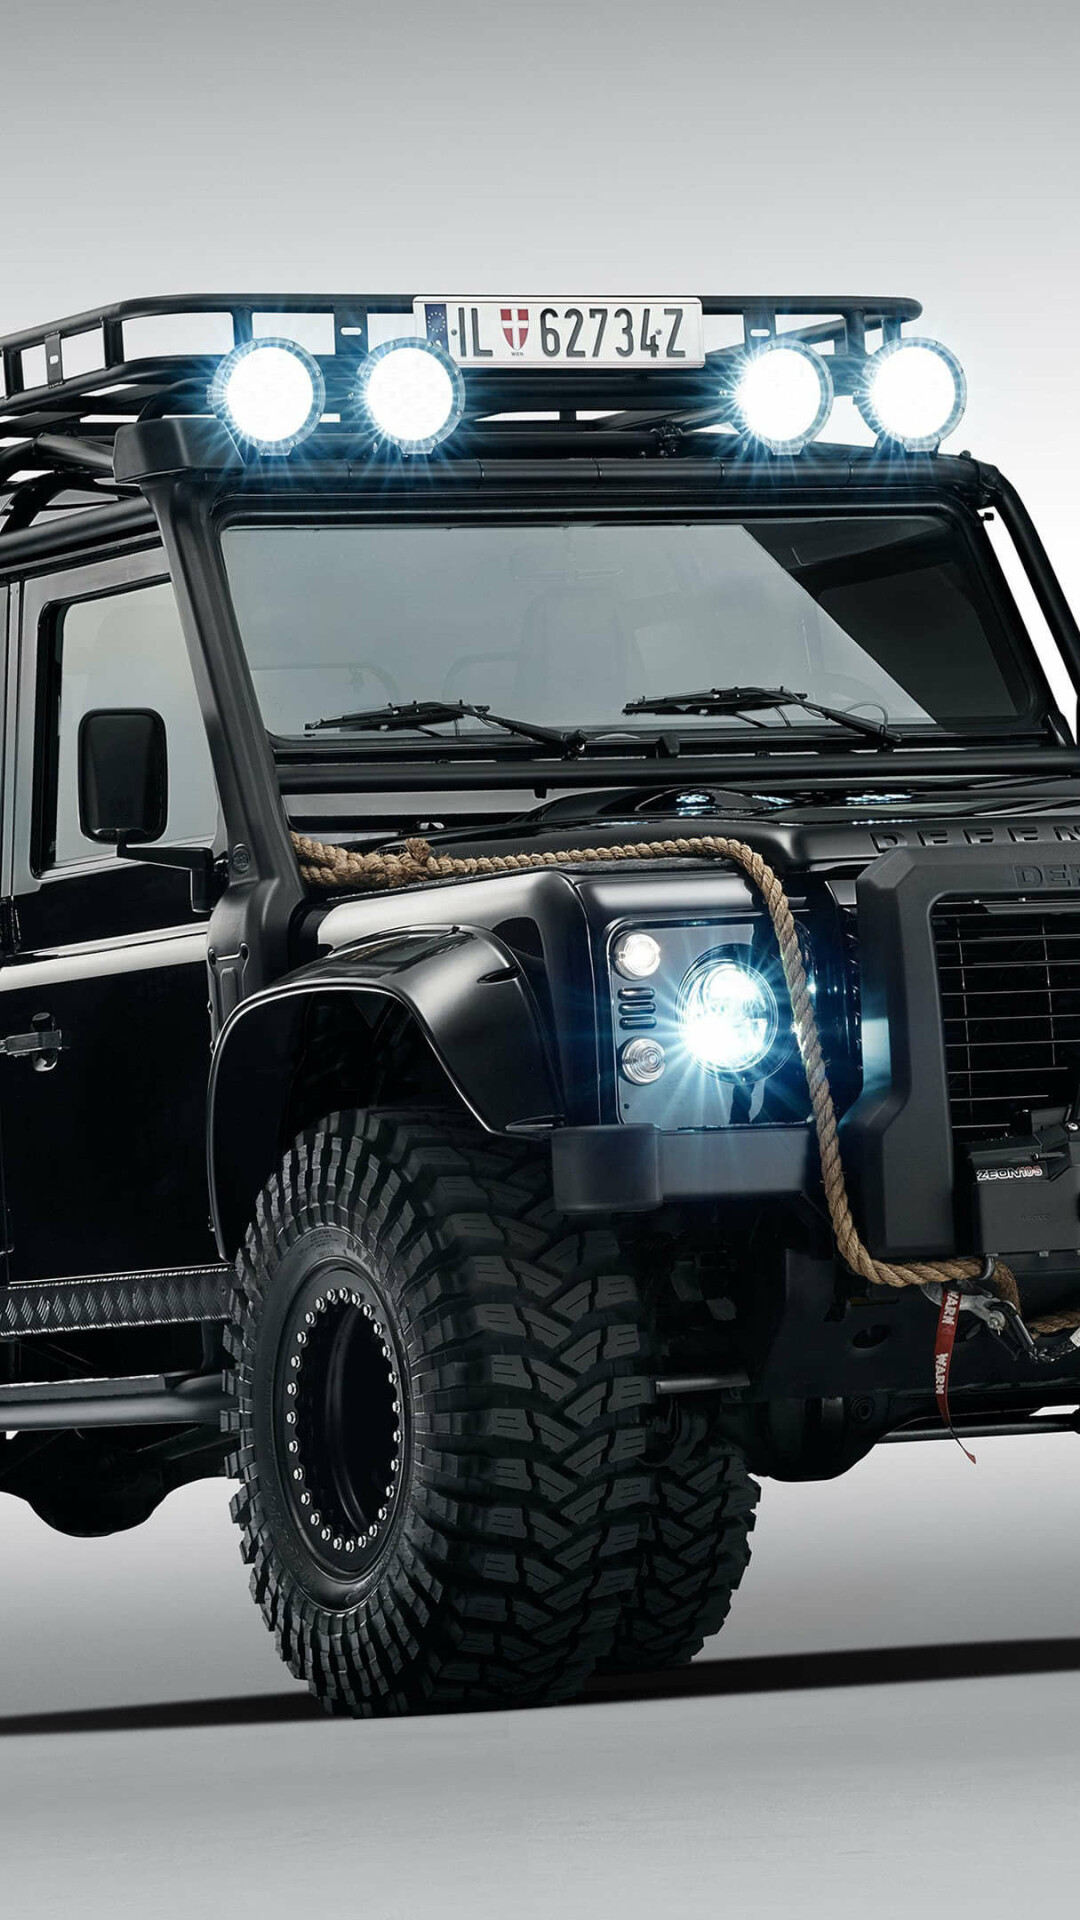 Land Rover: Defender 007 Spectre, A subsidiary of India's Tata Motors since 2008. 1080x1920 Full HD Background.